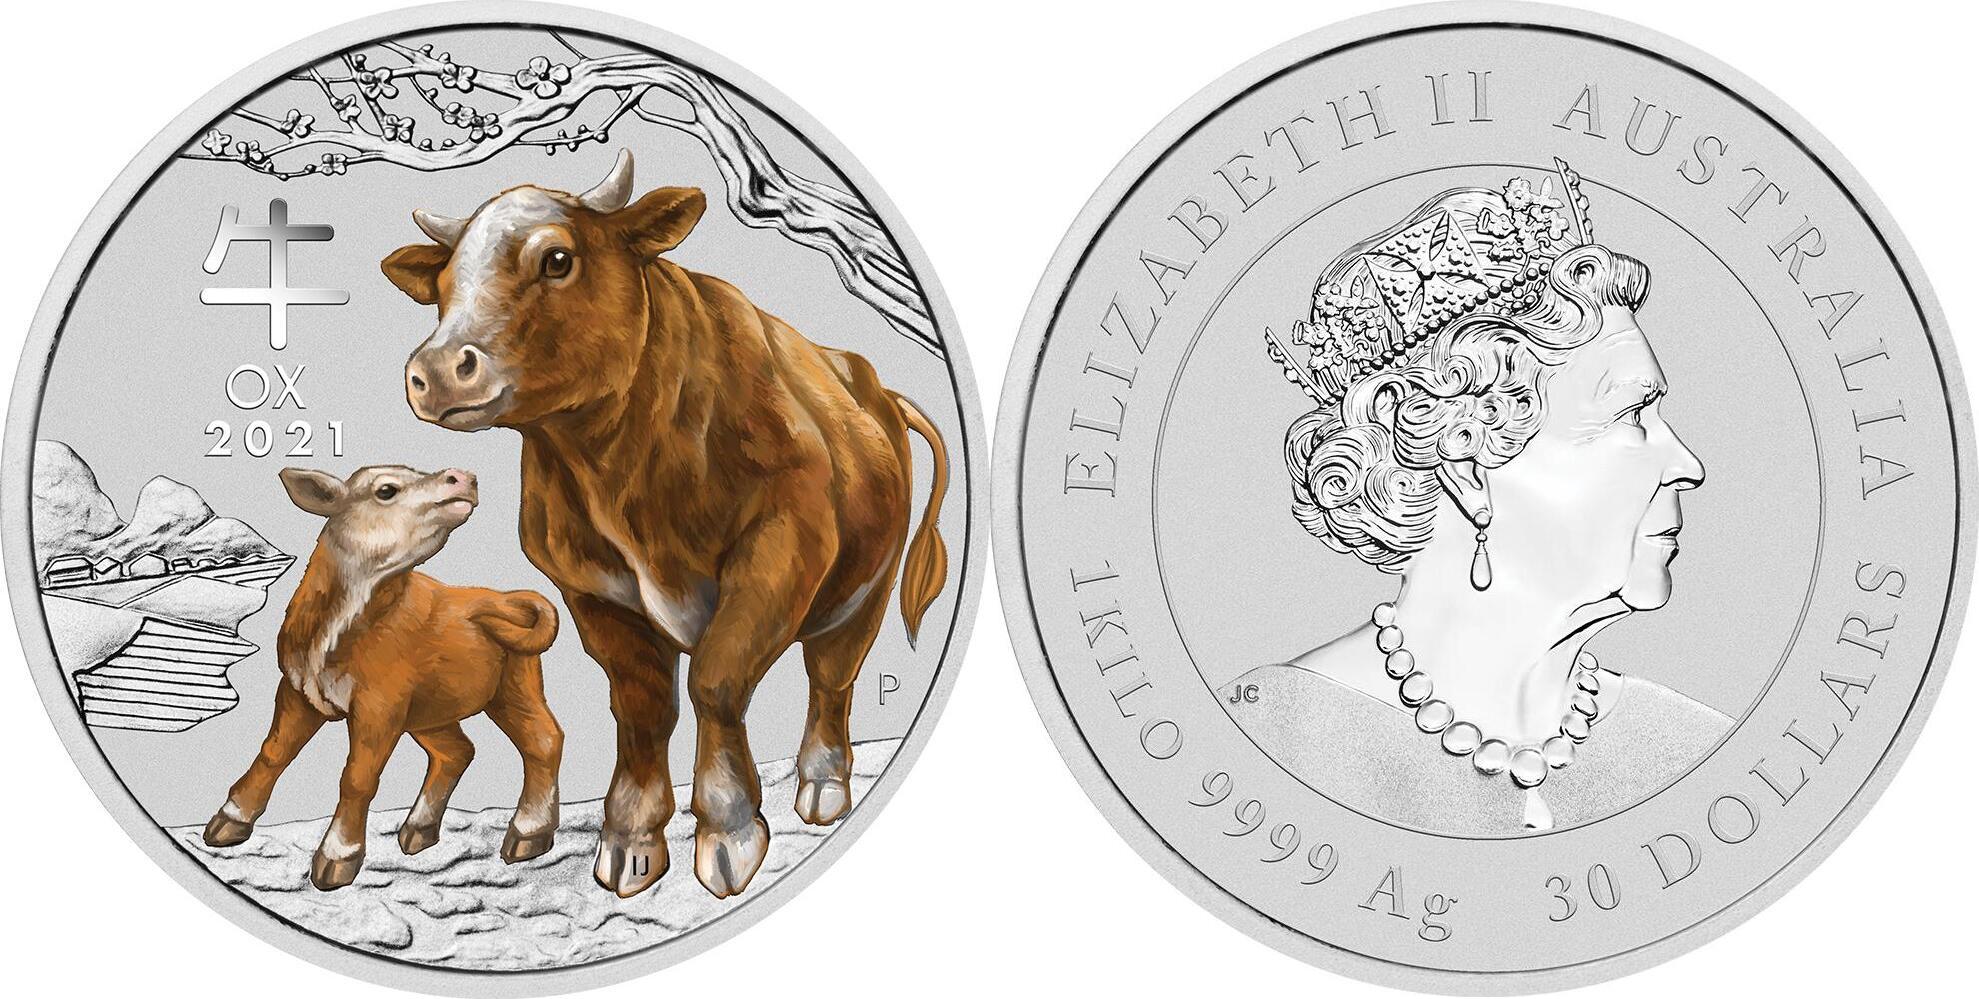 Australien 30$ 2021 1 kg Silver Coin Lunar Series III. - Year of the Ox -  color BU